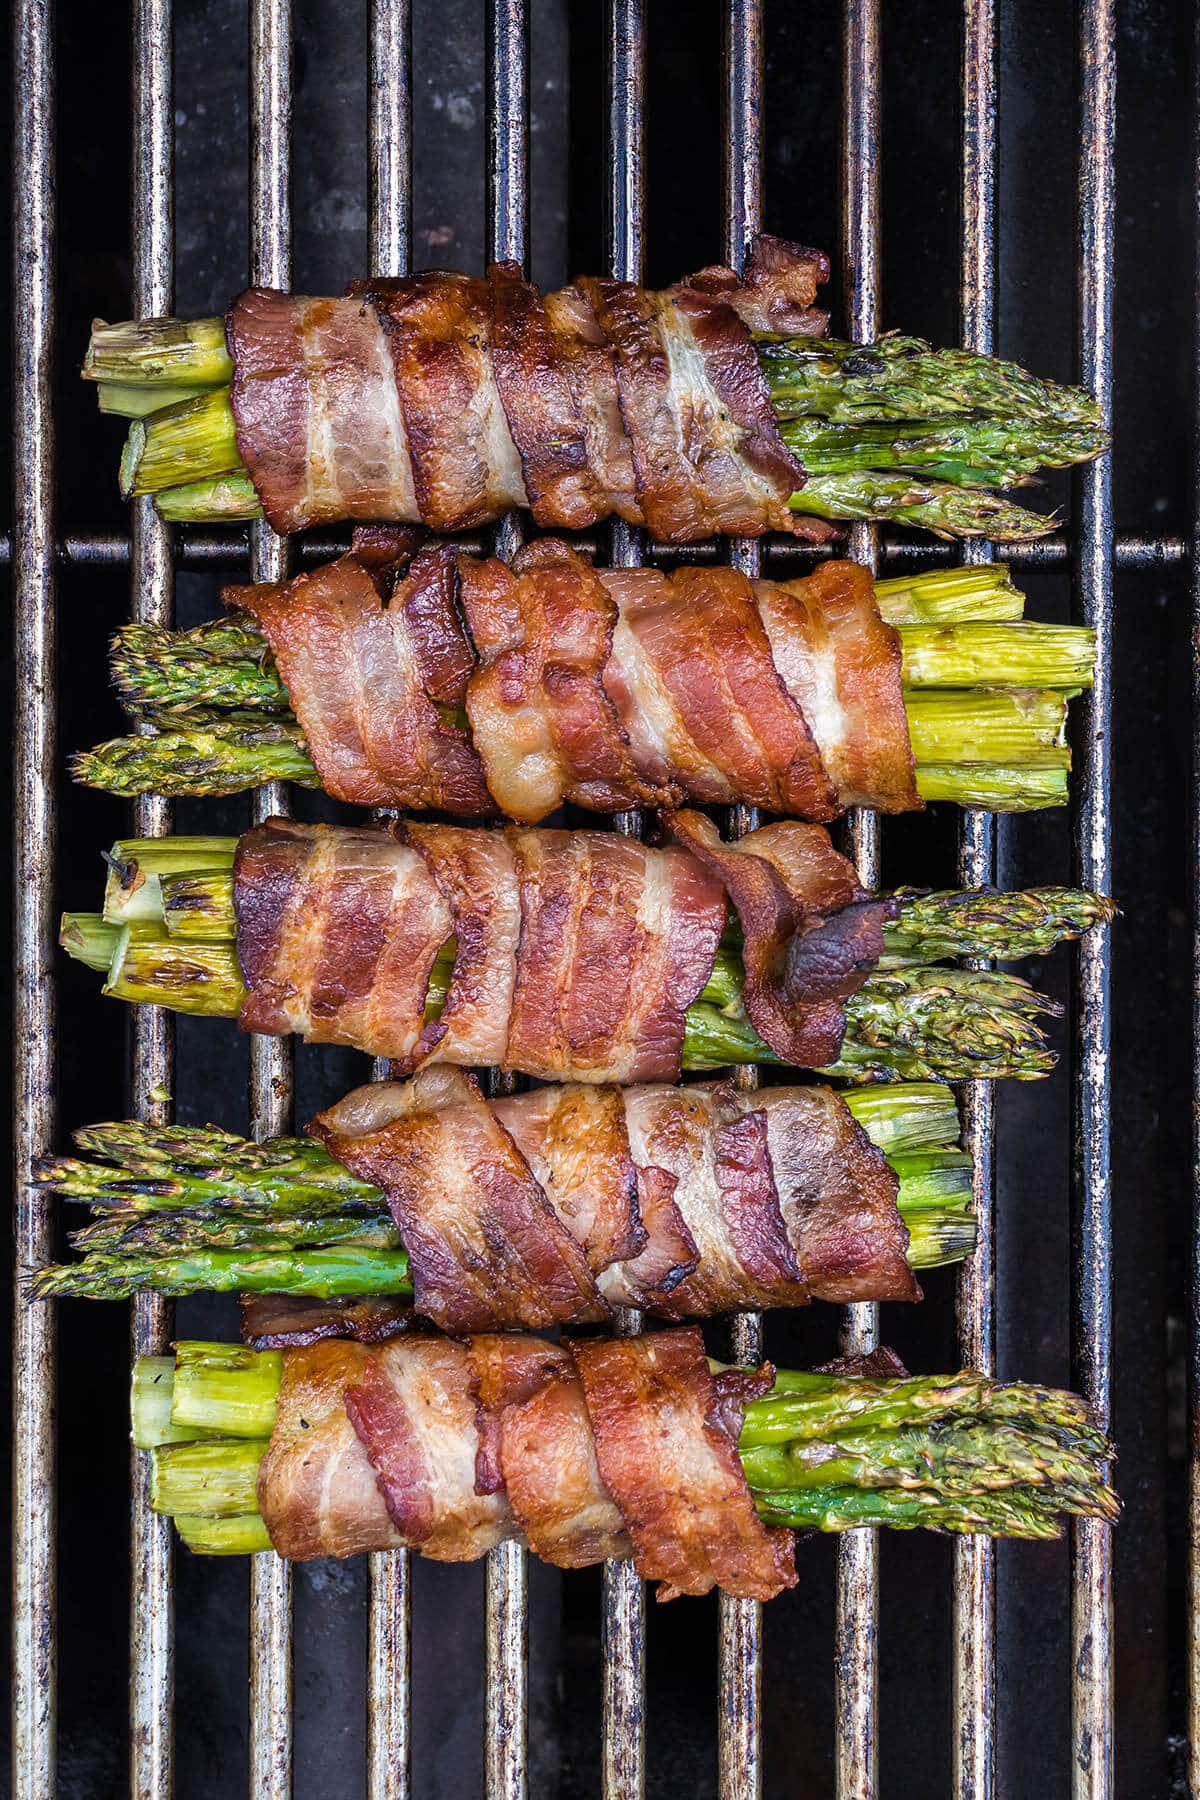 Bundles of cooked asparagus wrapped in bacon on the bbq.